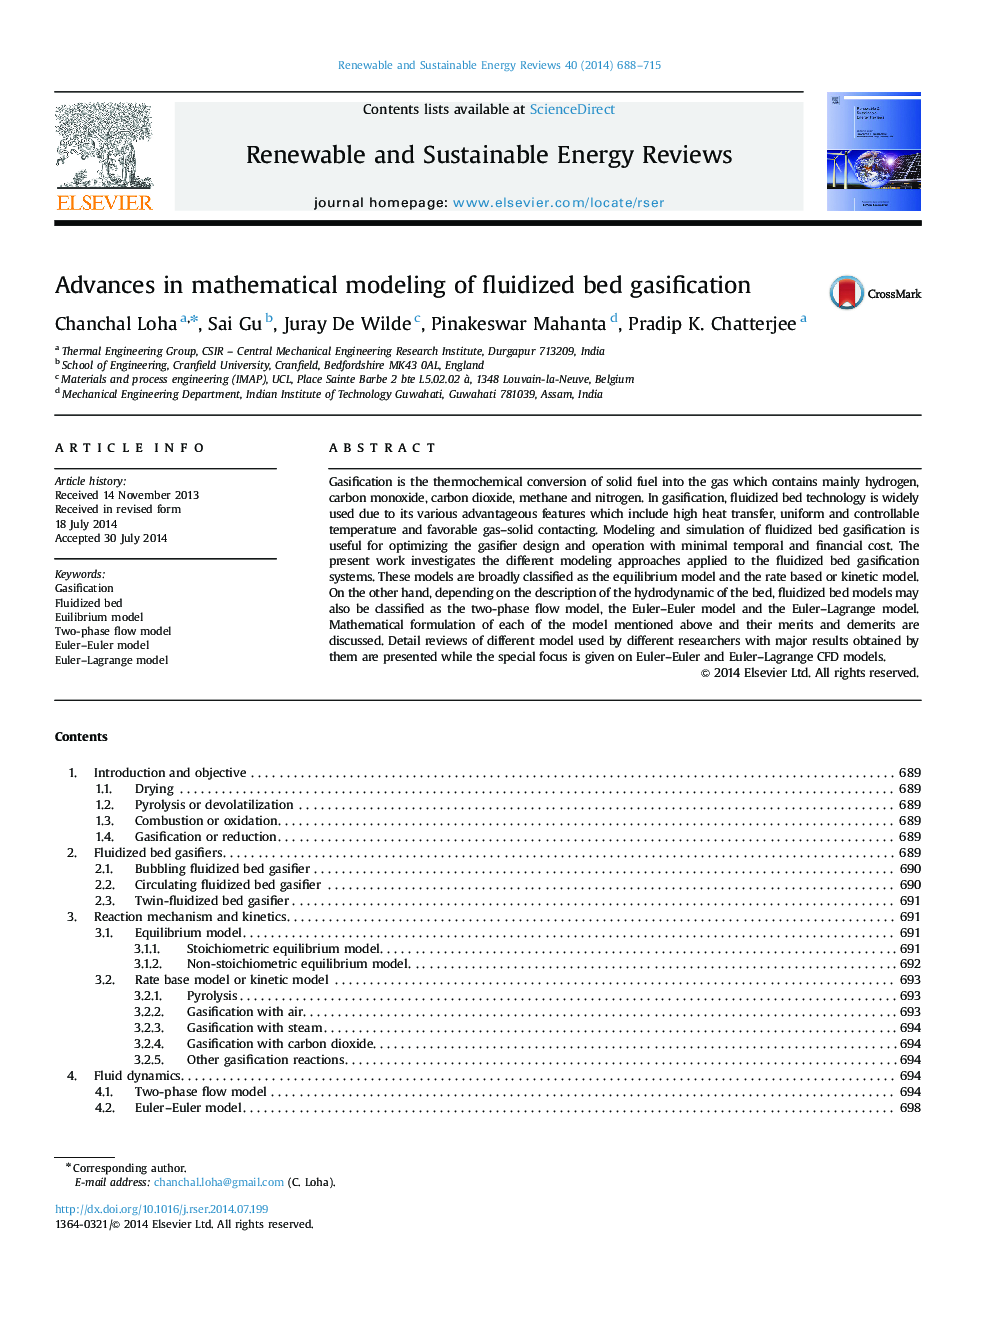 Advances in mathematical modeling of fluidized bed gasification